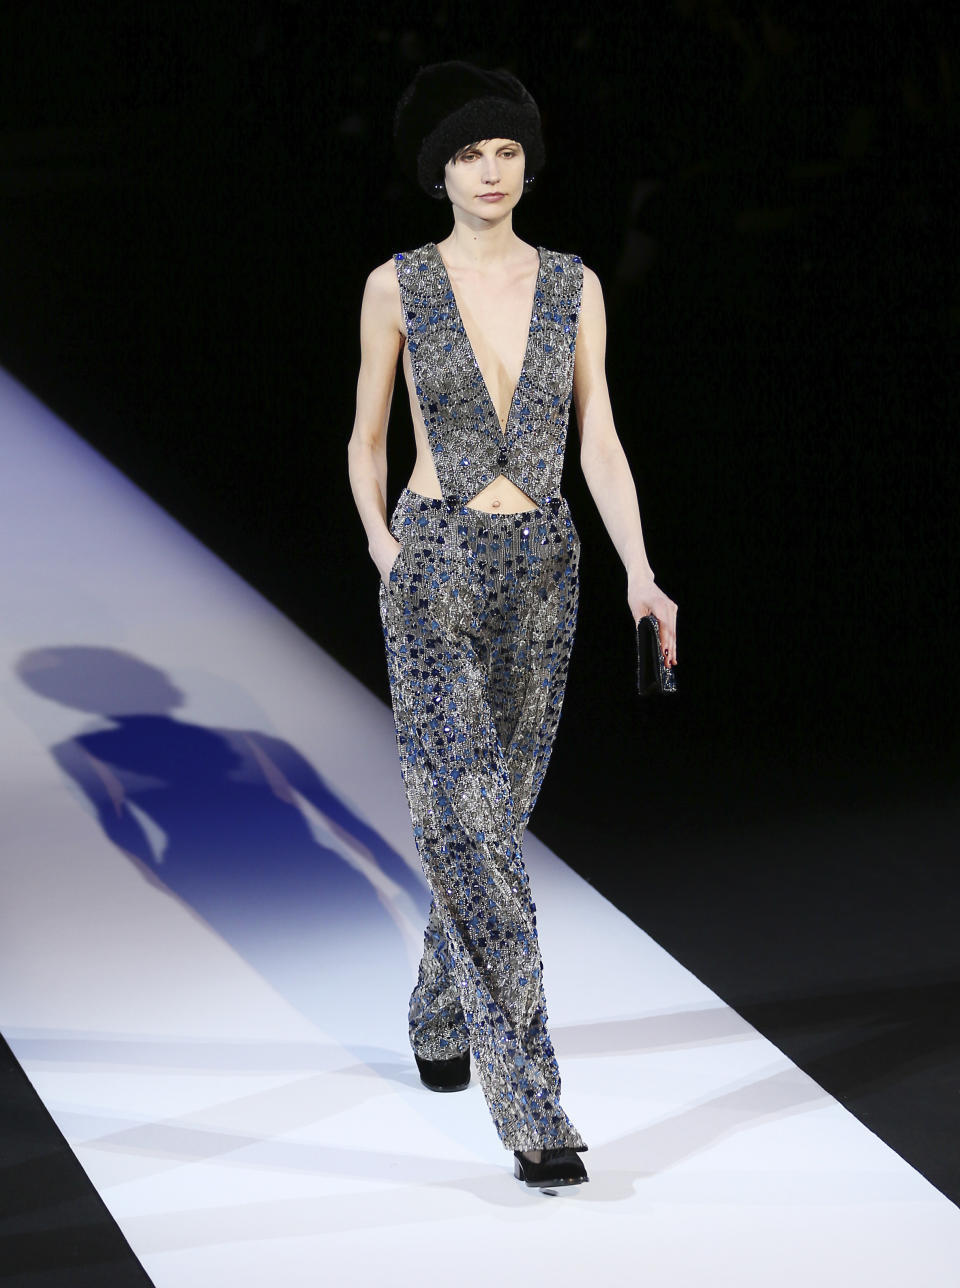 A model wears a creation for Giorgio Armani women's Fall-Winter 2013-14 collection, part of the Milan Fashion Week, unveiled in Milan, Italy, Monday, Feb. 25, 2013. (AP Photo/Antonio Calanni)